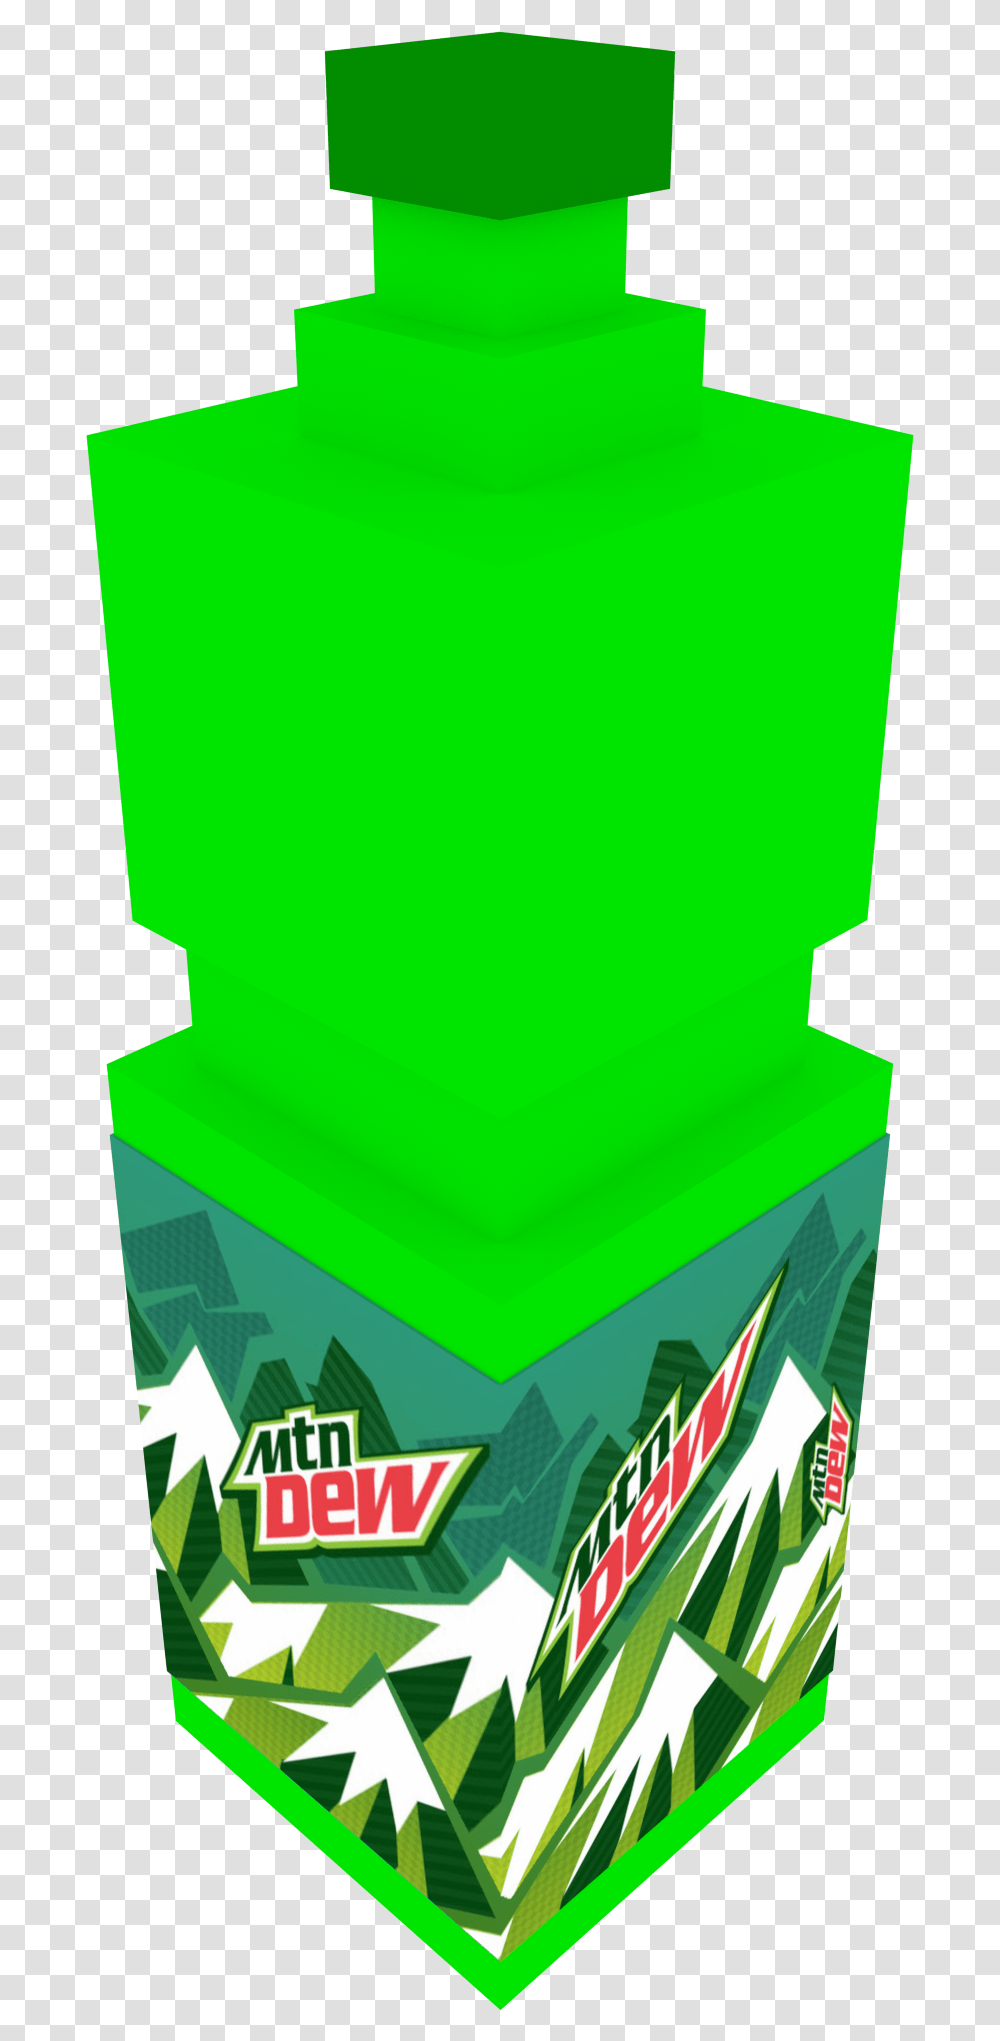 Download Mountain Dew Bottle Background Background Graphic Mountains, Green, Graphics, Art, Symbol Transparent Png